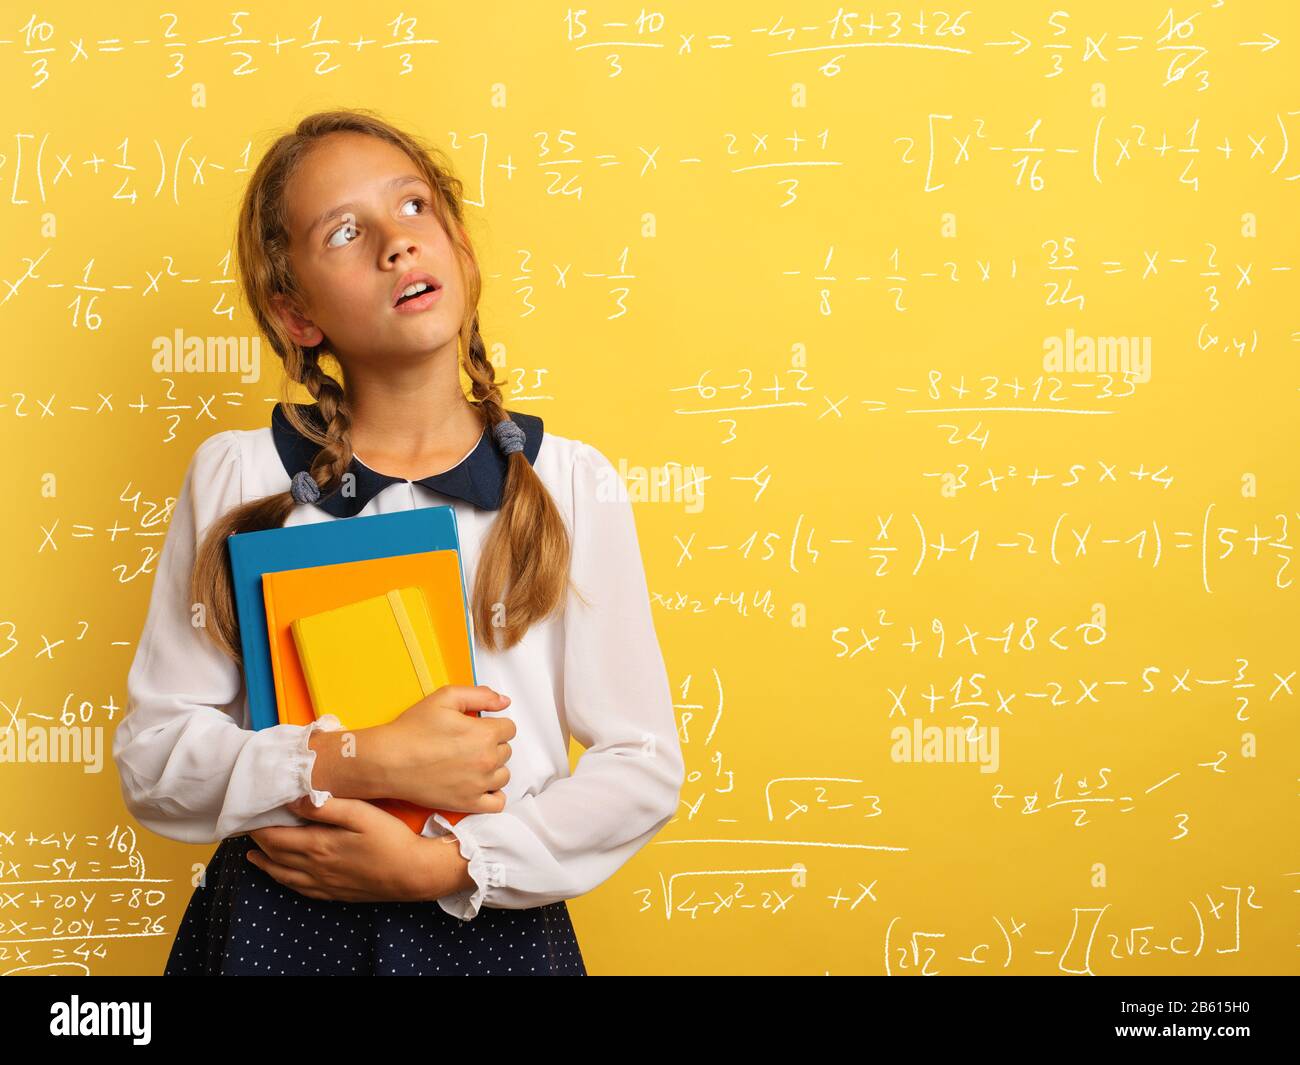 Young student is with shocked expression and think about complex exercises. Yellow background Stock Photo